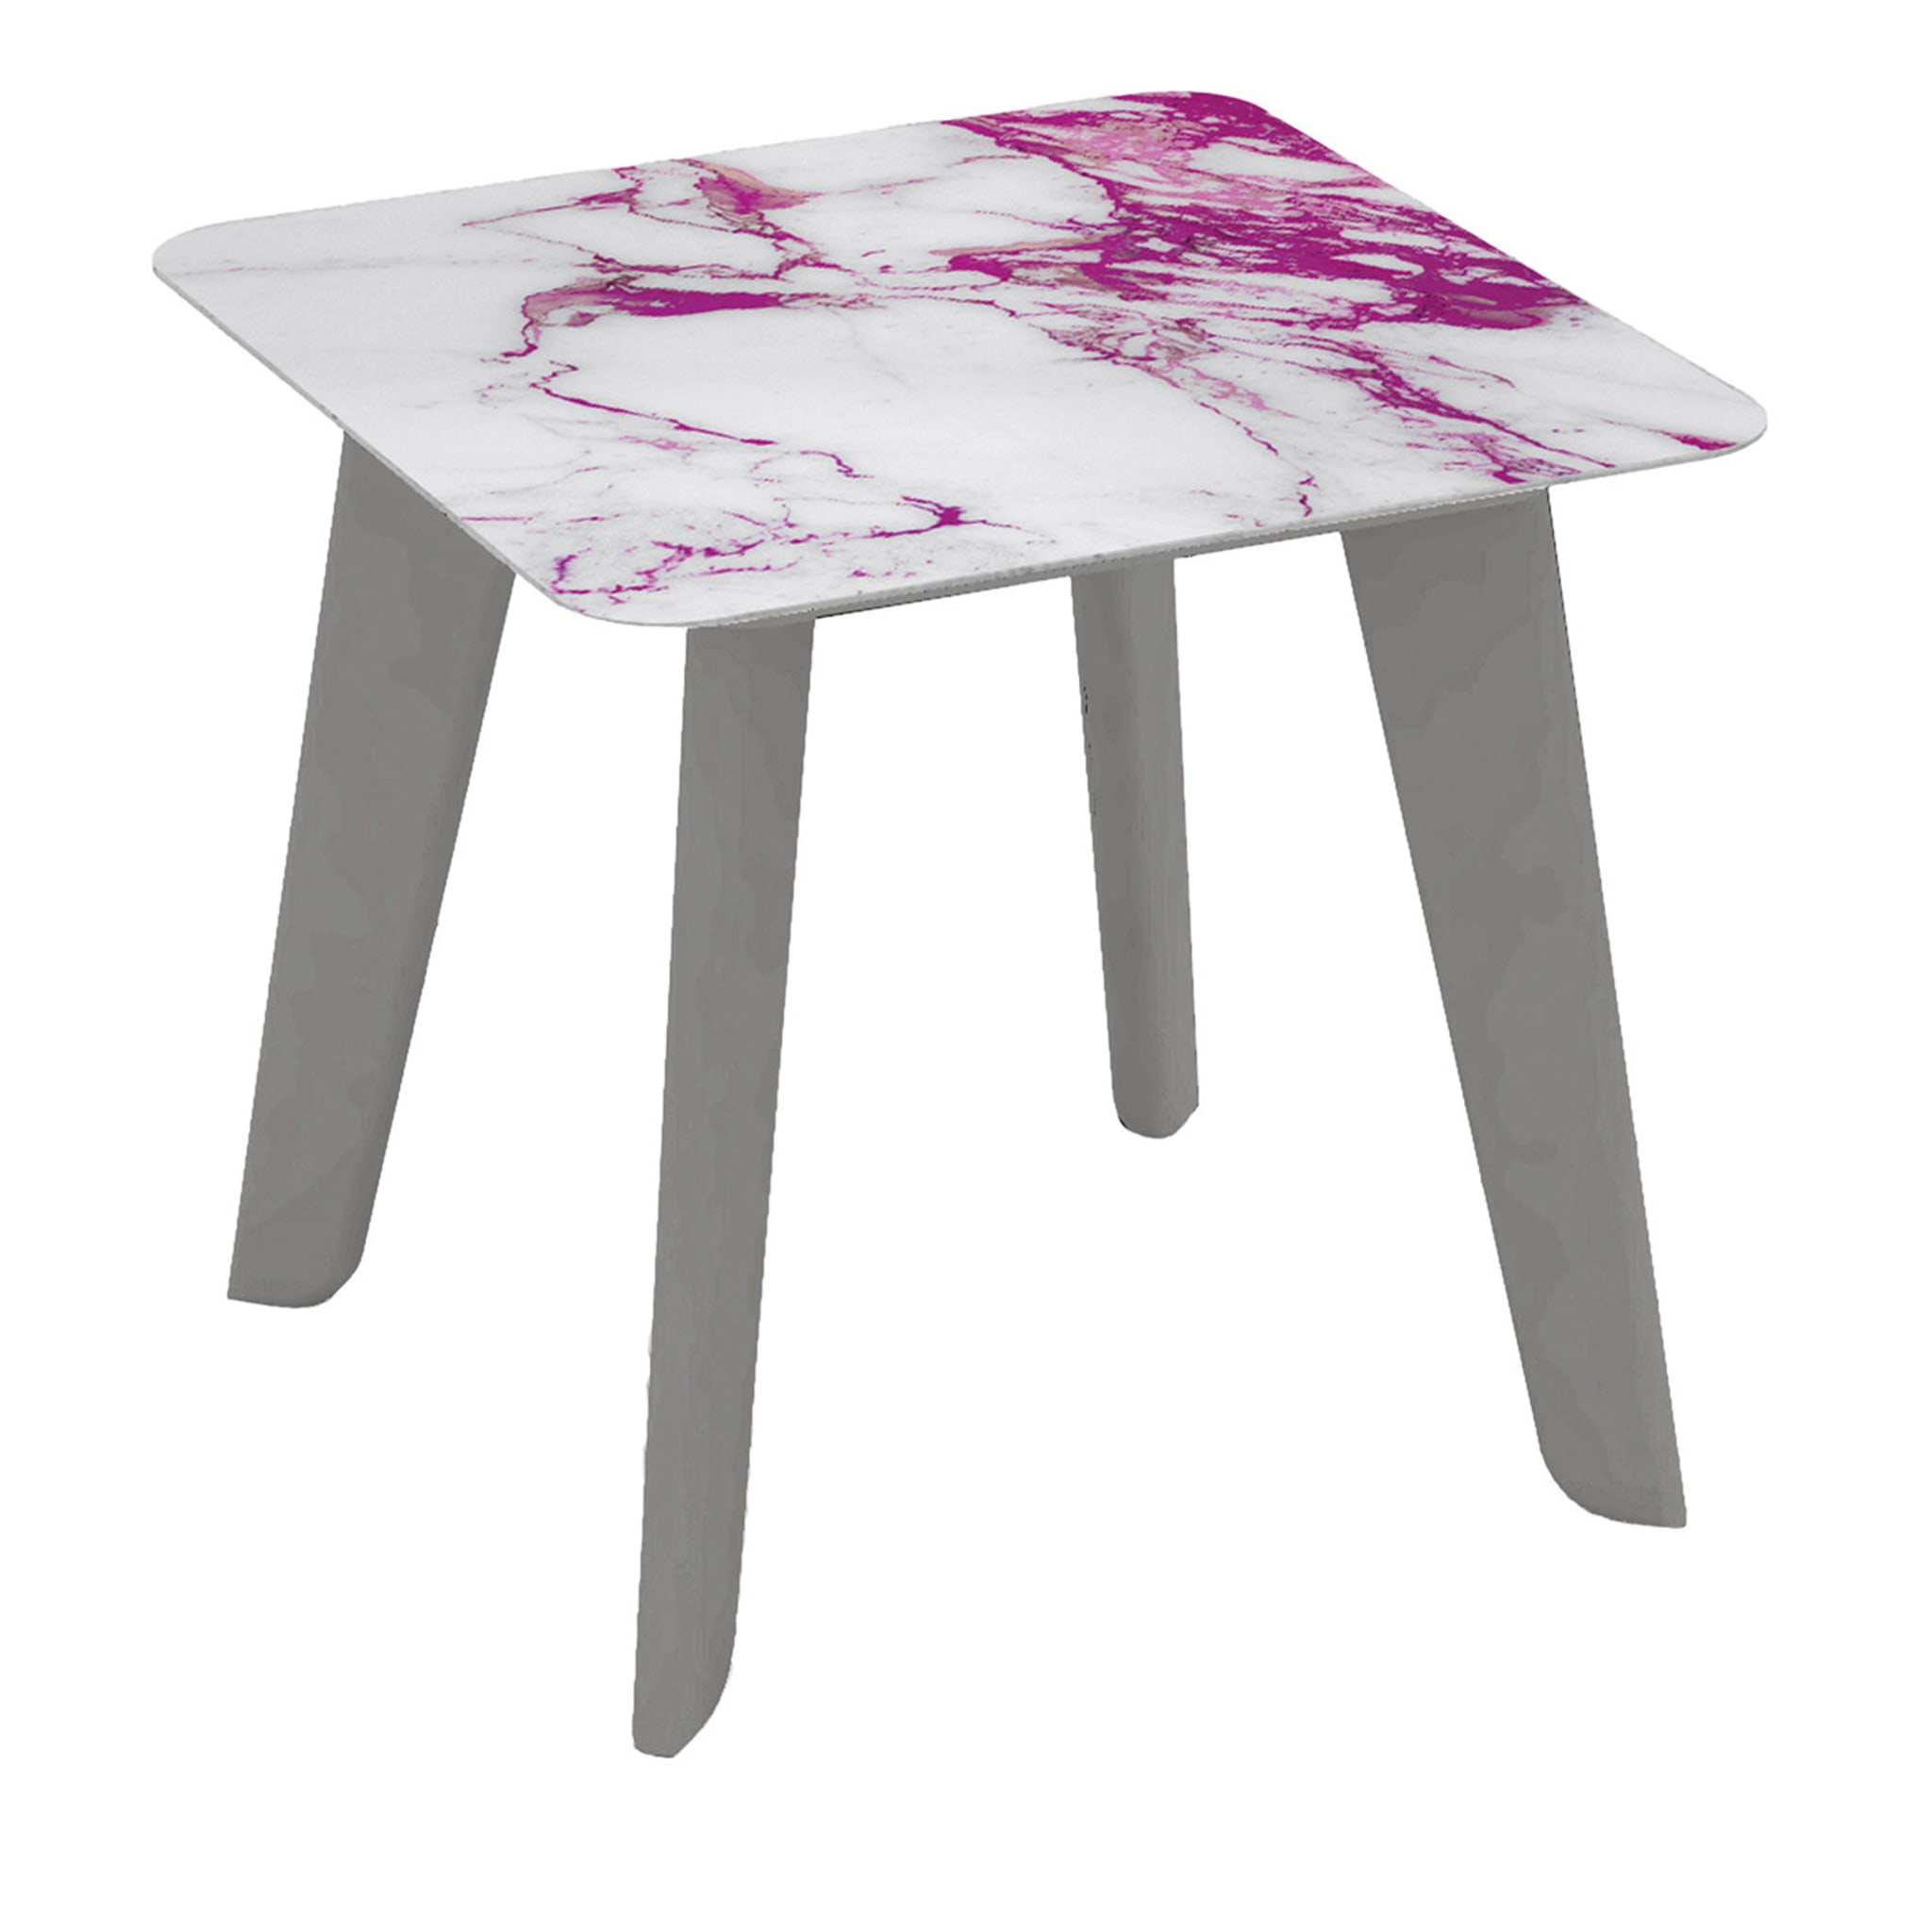 Owen Low Square Side Table with Pink and White Top (Table d'appoint carrée basse avec plateau rose et blanc) - Vue principale